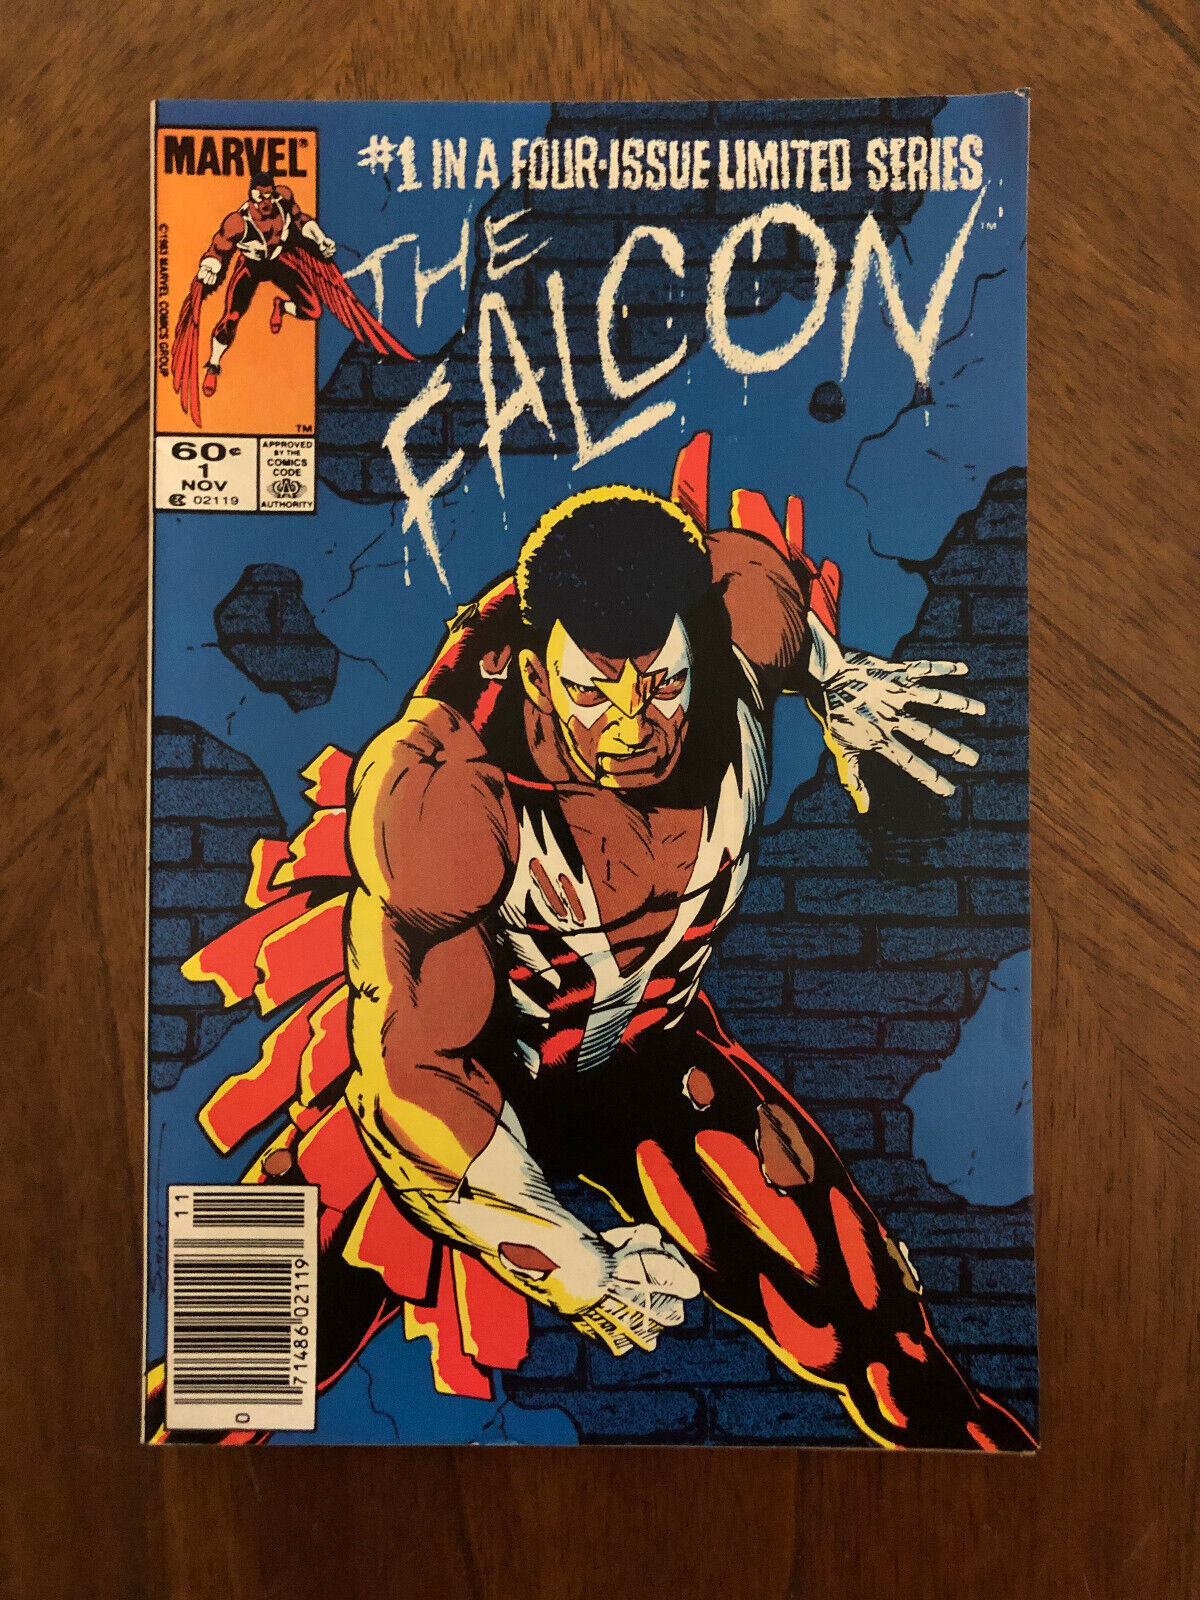 The Falcon #1 (Marvel, 1983) VF/NM 9.0 Issue 1 of 4 Issue Limited Series